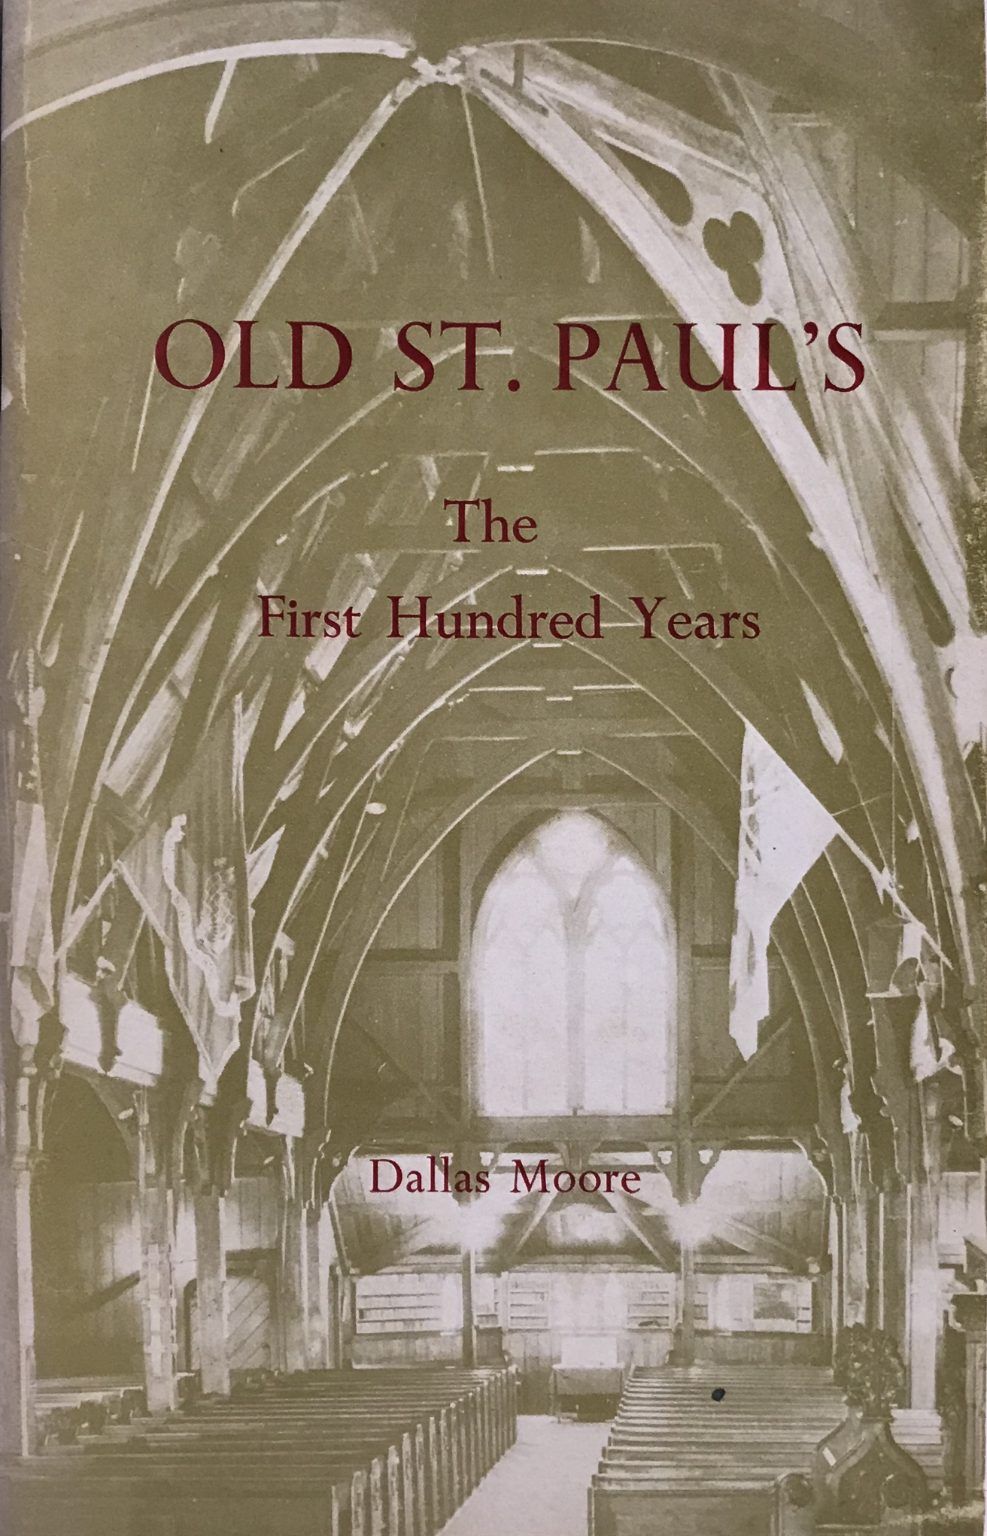 OLD ST. PAUL'S: The First Hundred Years